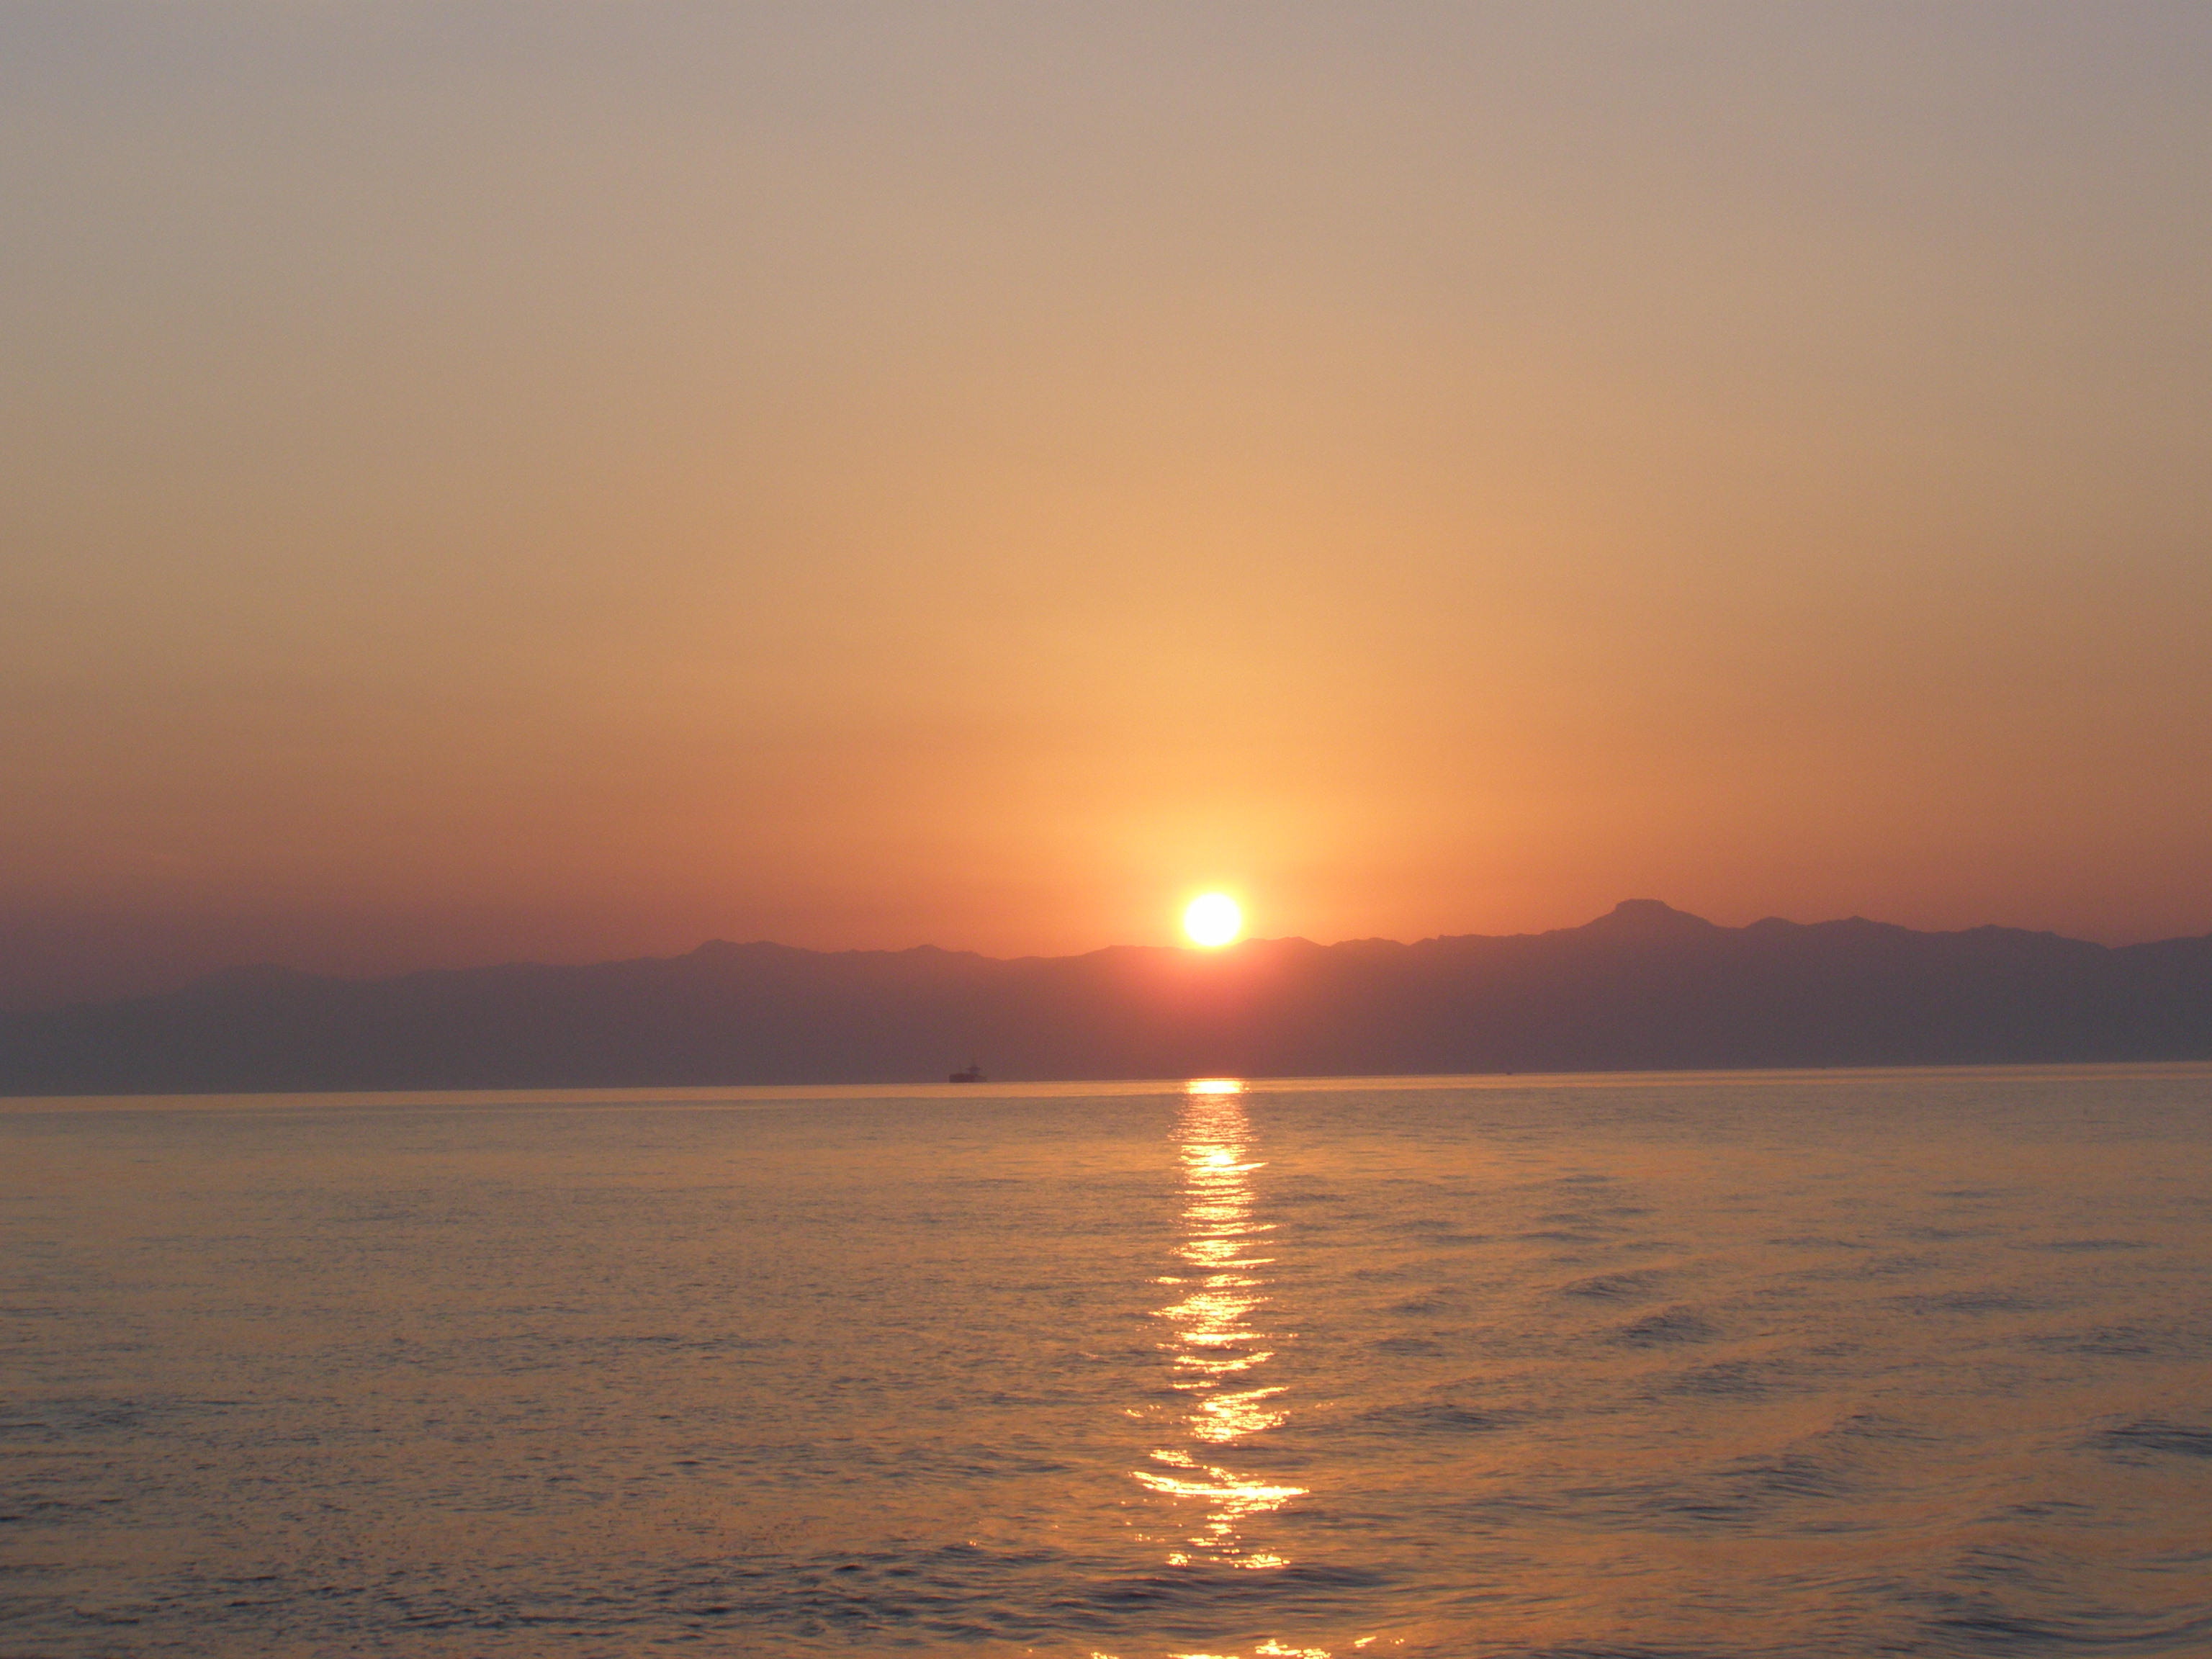 Sunset as we left the straits and headed into the Ionian Sea